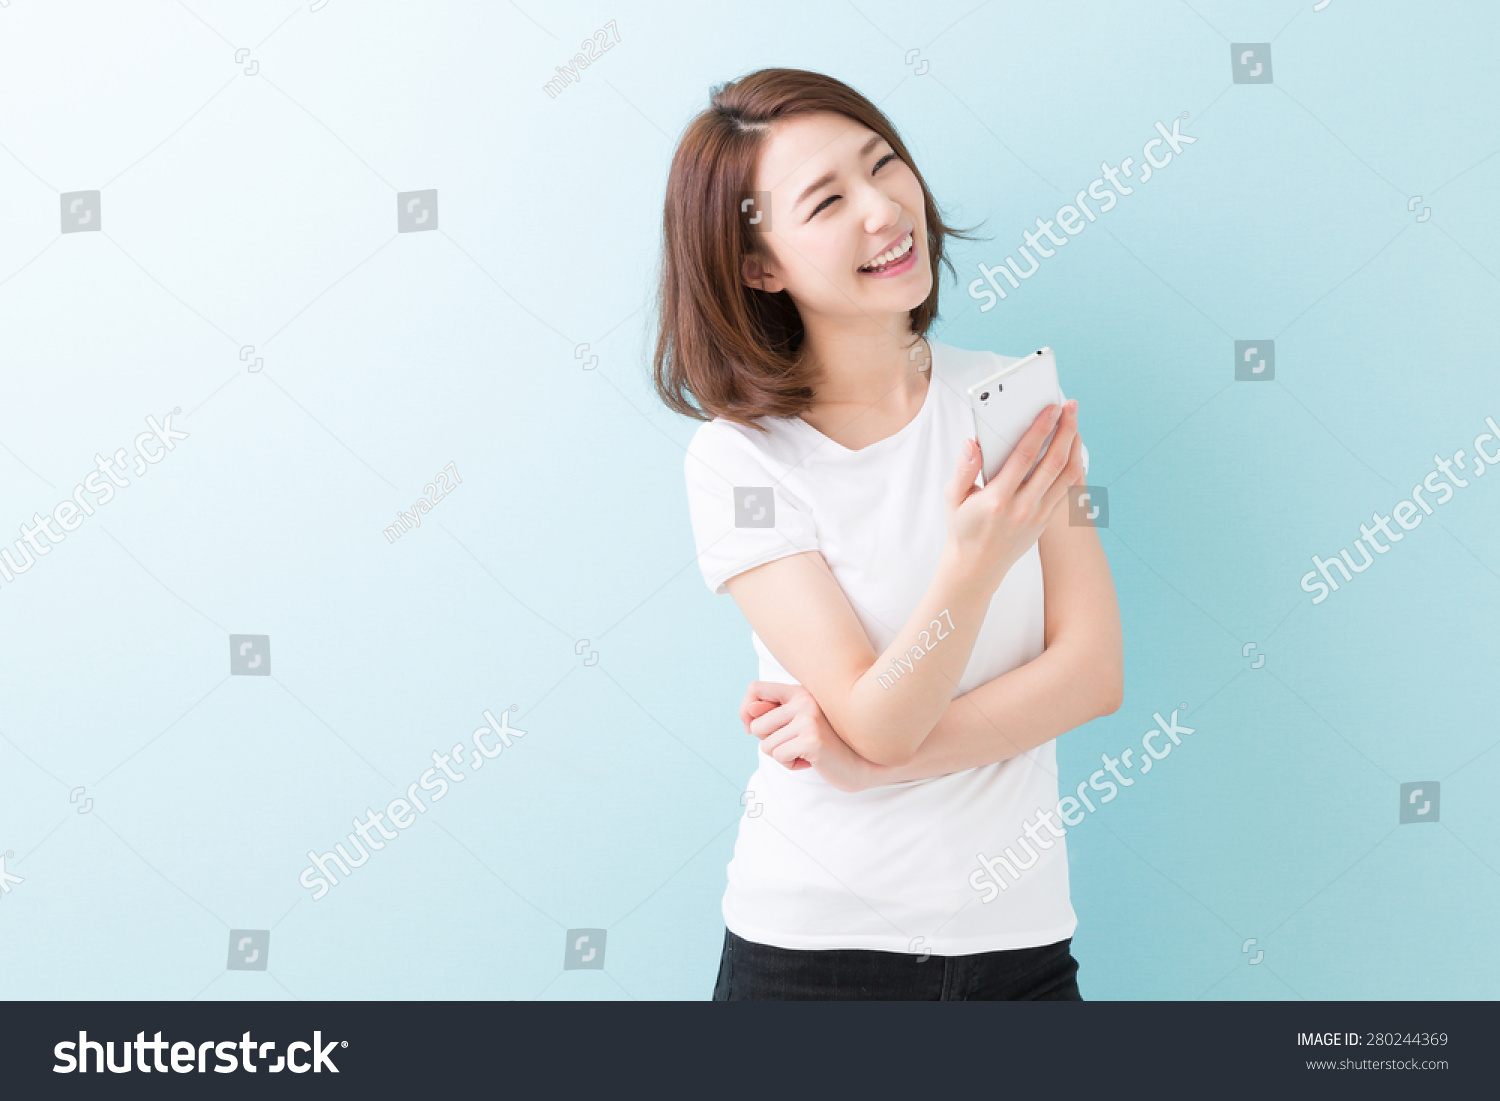 Young Attractive Asian Woman See Smart Foto Stok 280244369 Shutterstock.